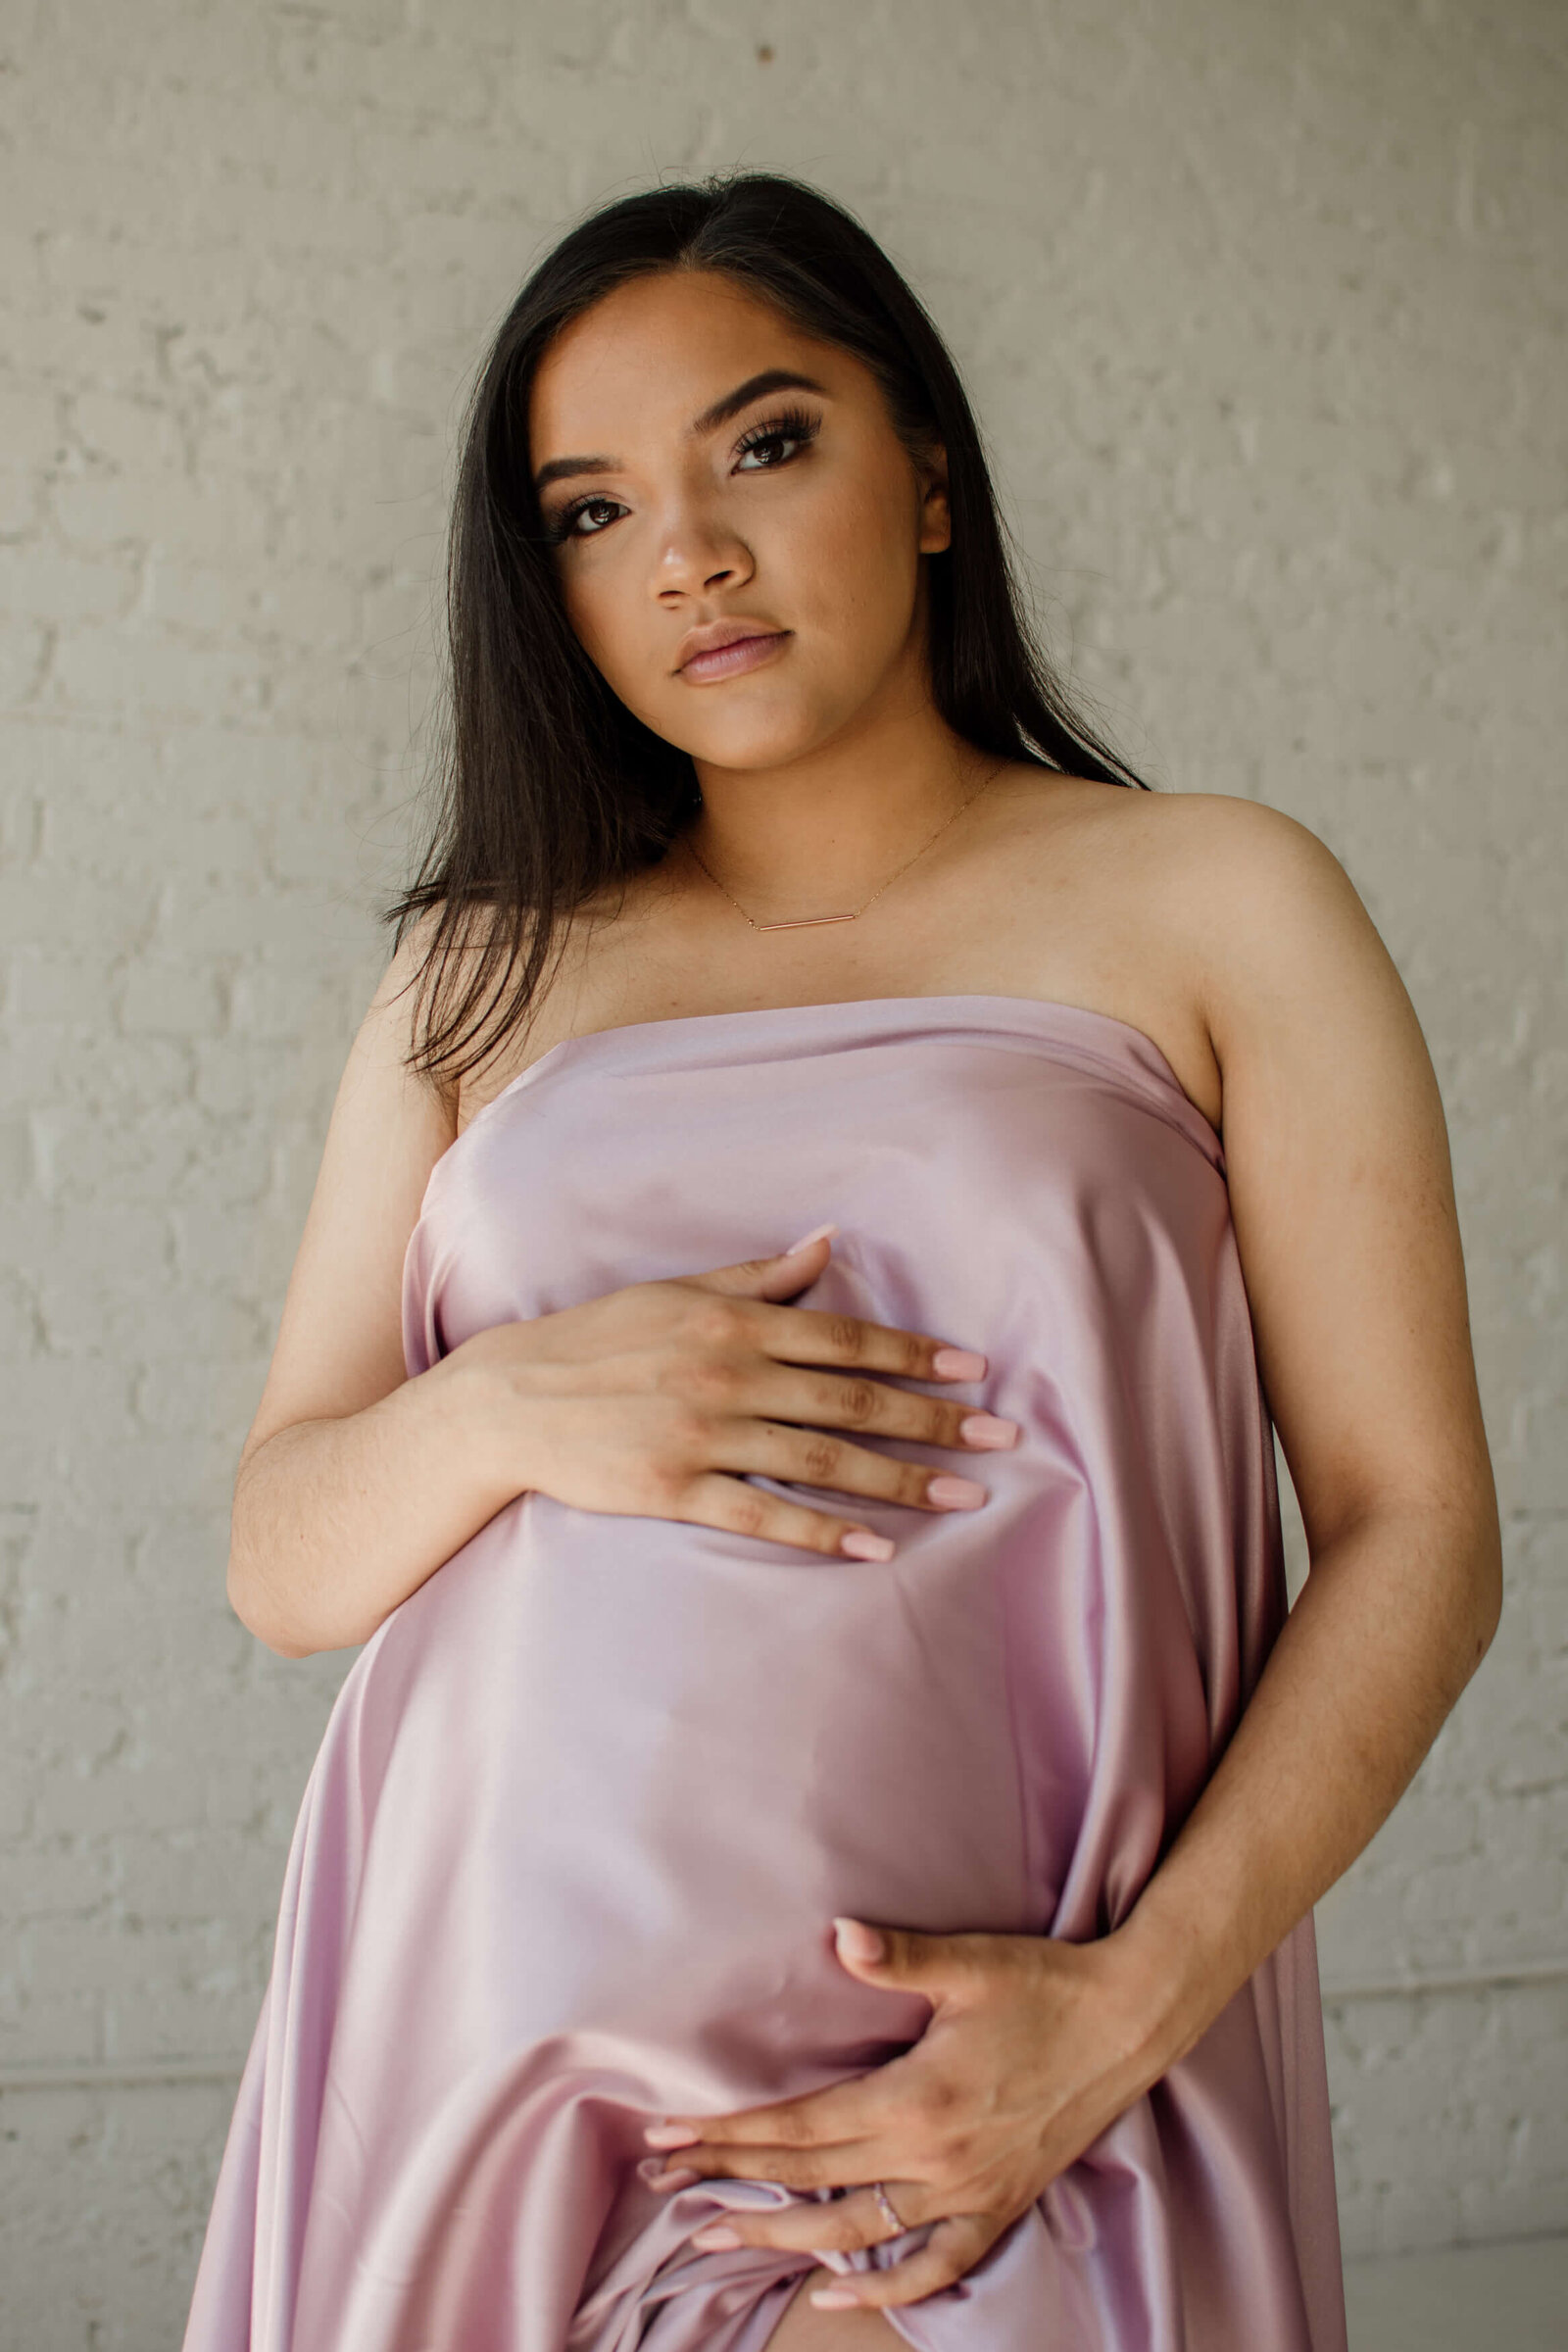 Pregnant woman holding pink satin fabric over belly.